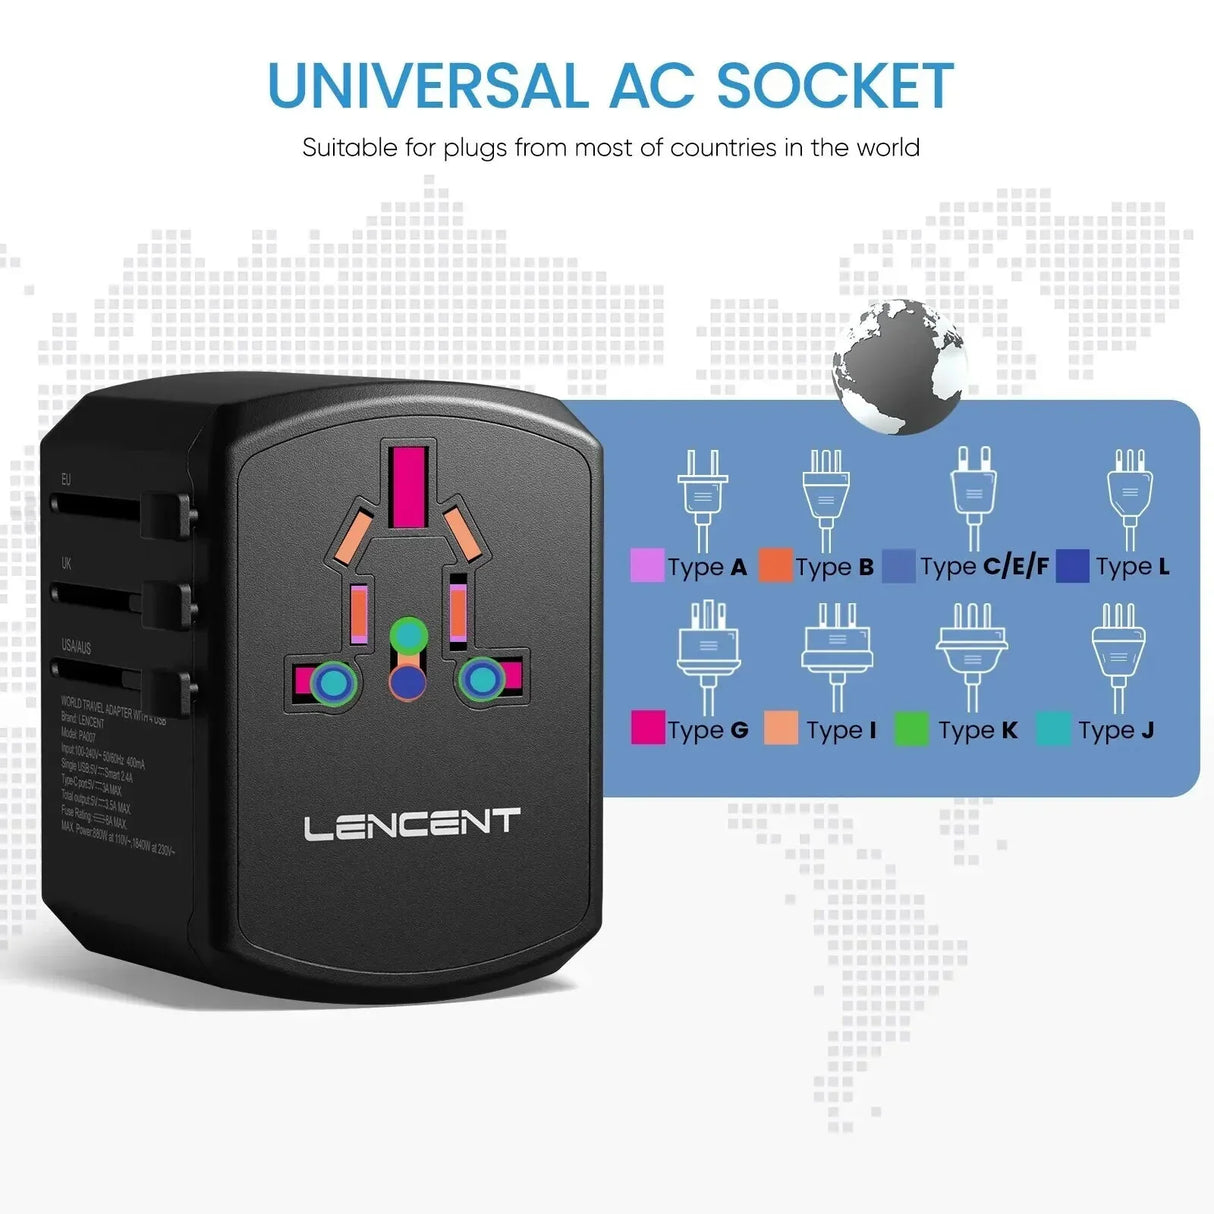 an image of the universal socket with the text universal socket